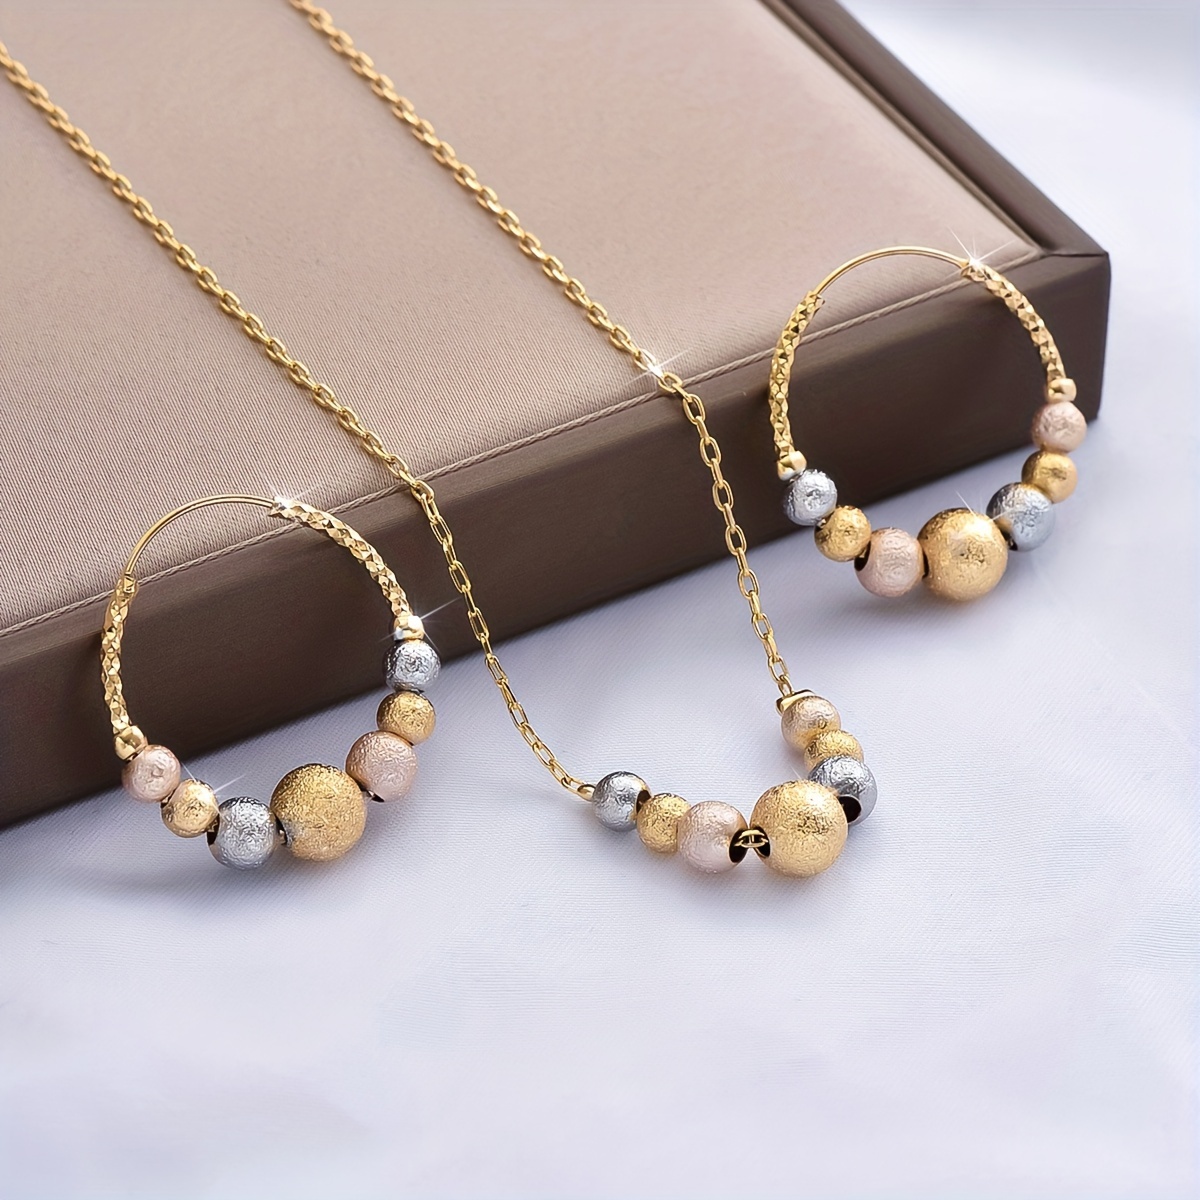 

2 Pieces/set Of New Frosted Round Bead Design Women's Fashionable Earrings Necklace Set, Daily Matching Clothing Jewelry, As A Birthday Gift For Female Friends